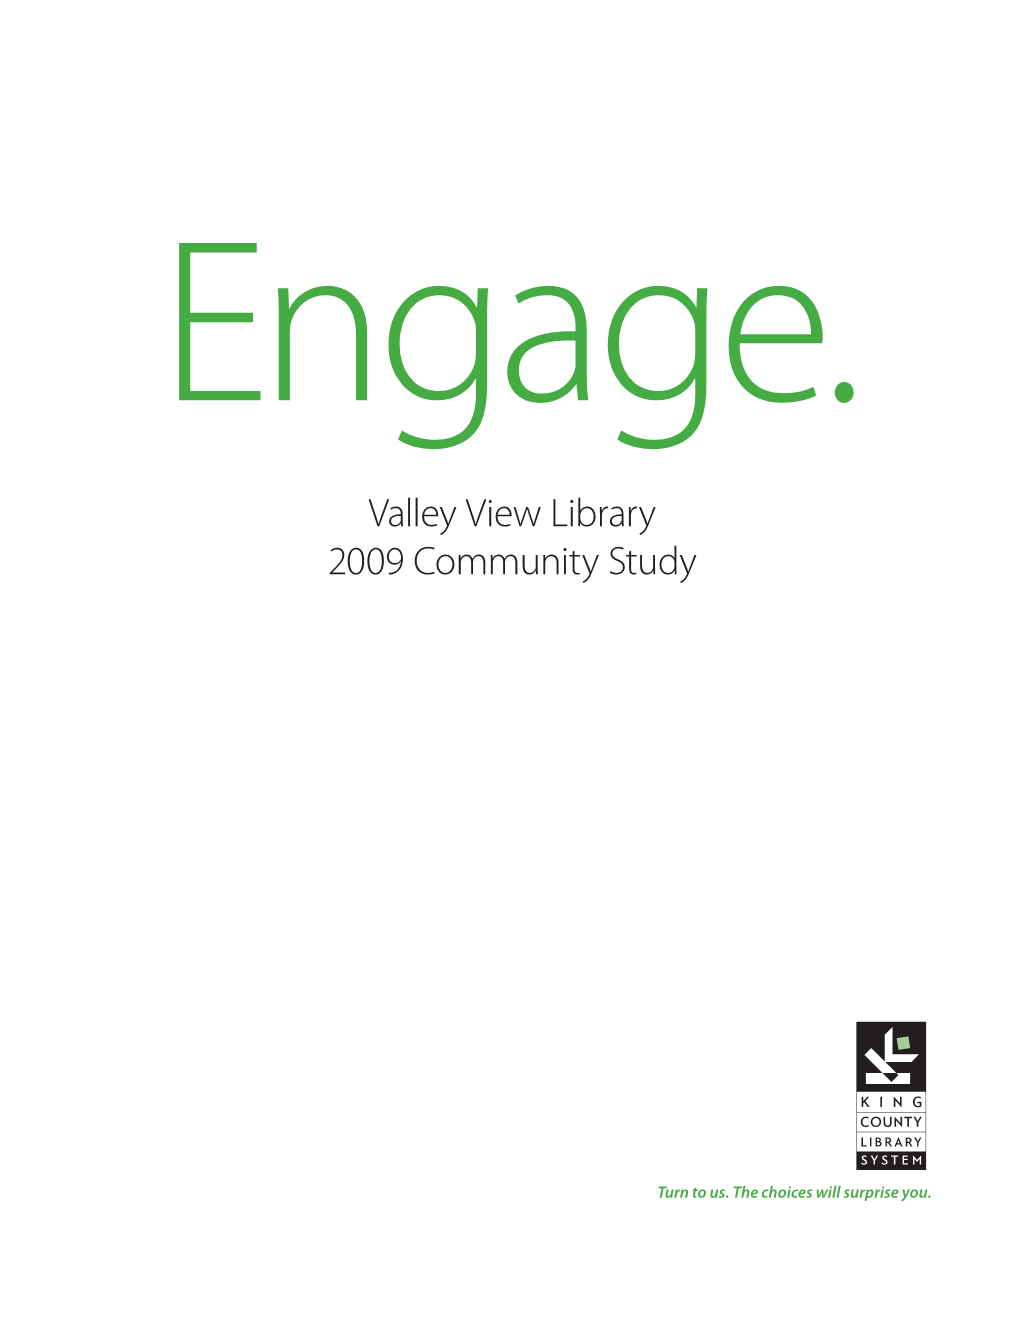 Valley View Library 2009 Community Study